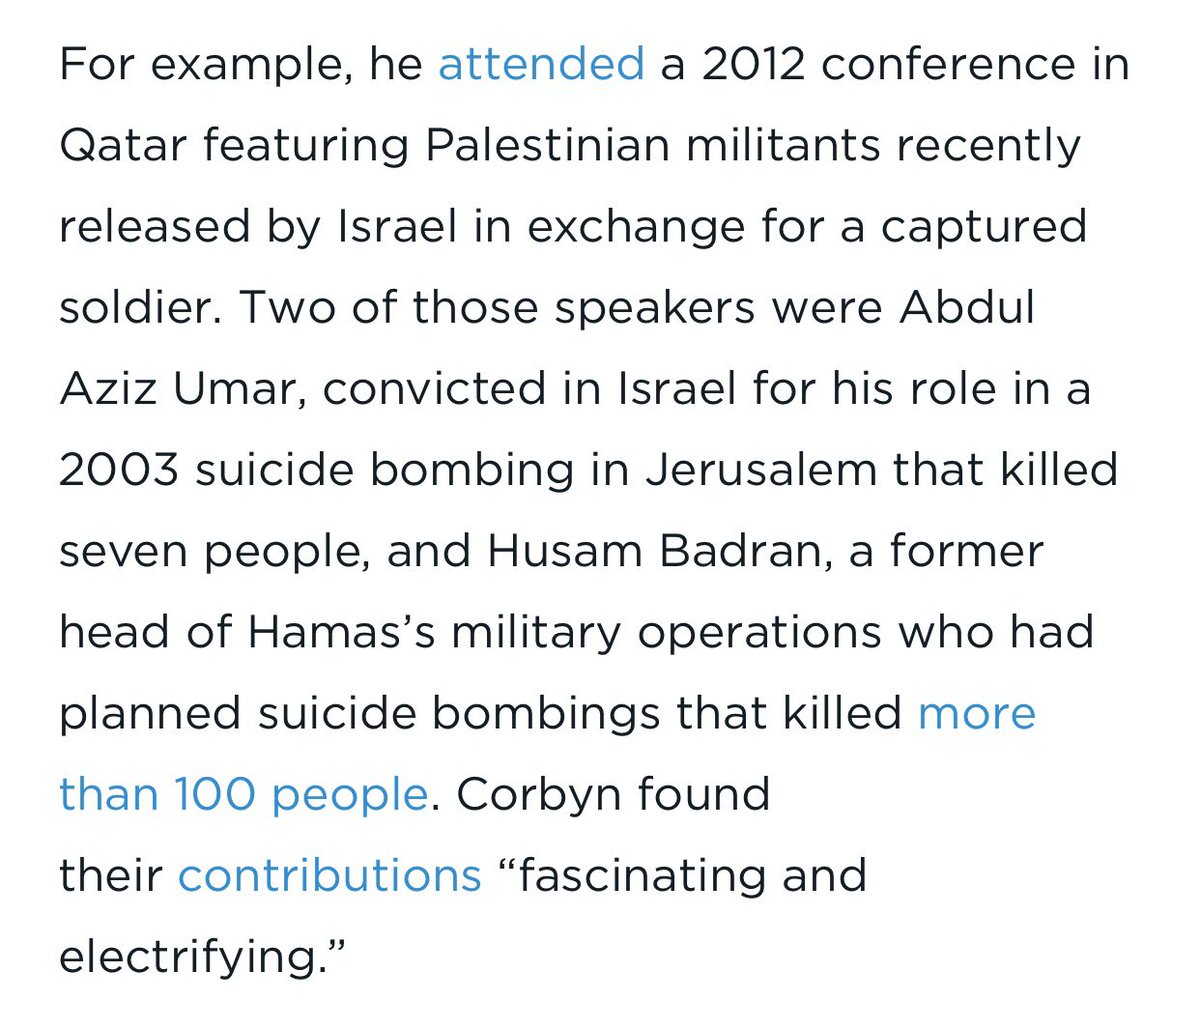 Corbyn on Hamas suicide bombers. (One reason British Jews are scared.) https://www.haaretz.com/world-news/europe/report-corbyn-was-at-conference-with-senior-hamas-officials-1.6390627